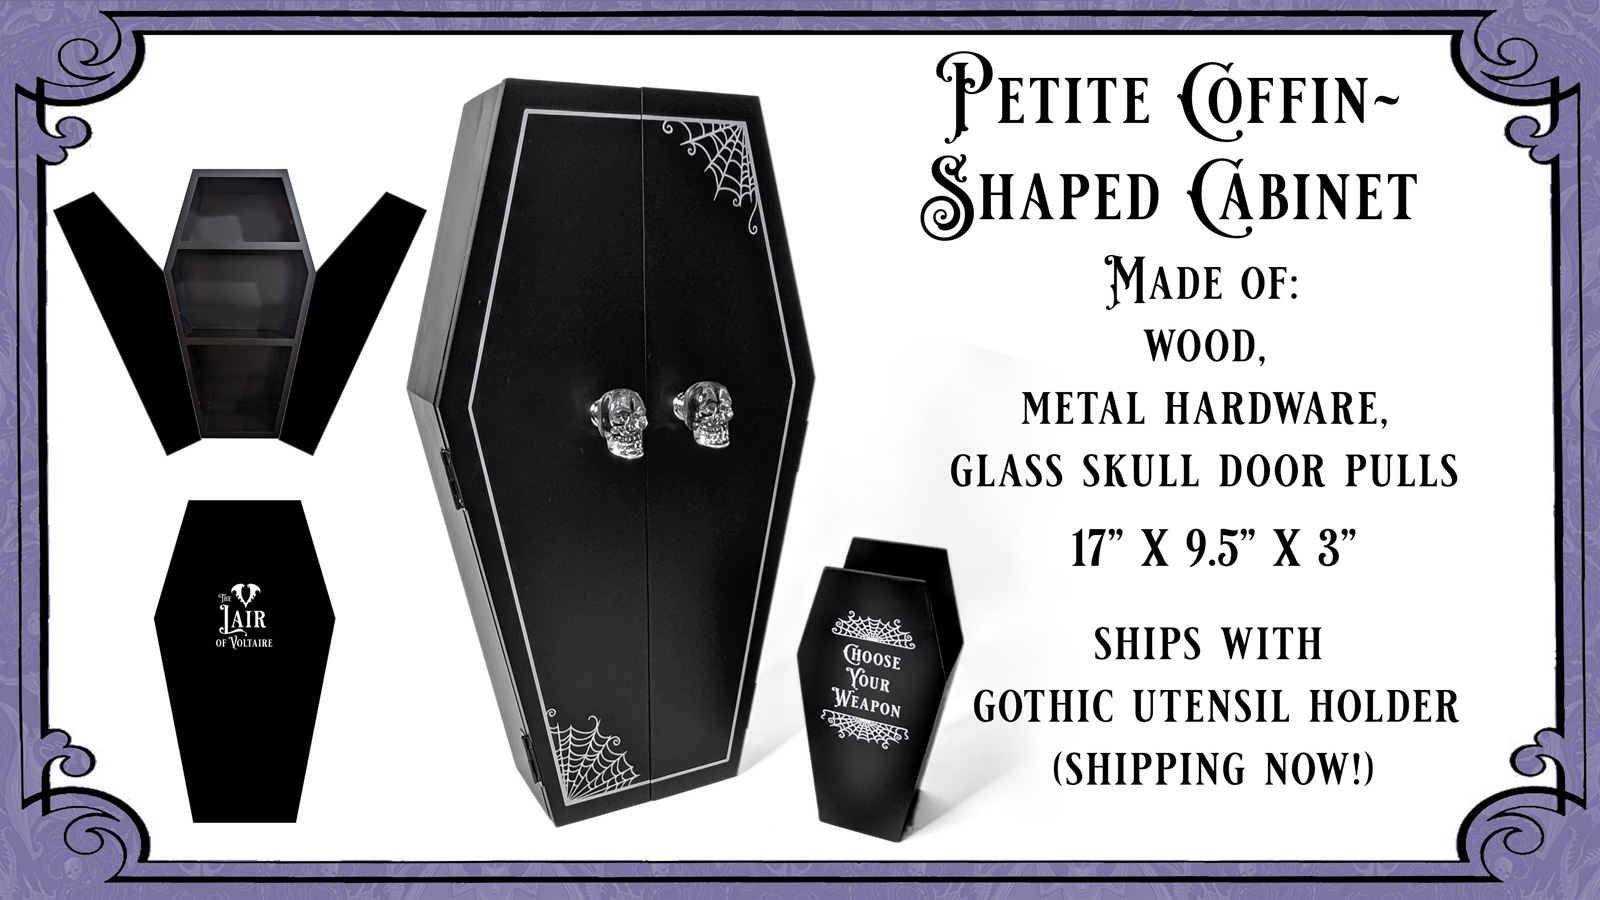 The Petite Coffin~Shaped Cabinet by The Lair of Voltaire